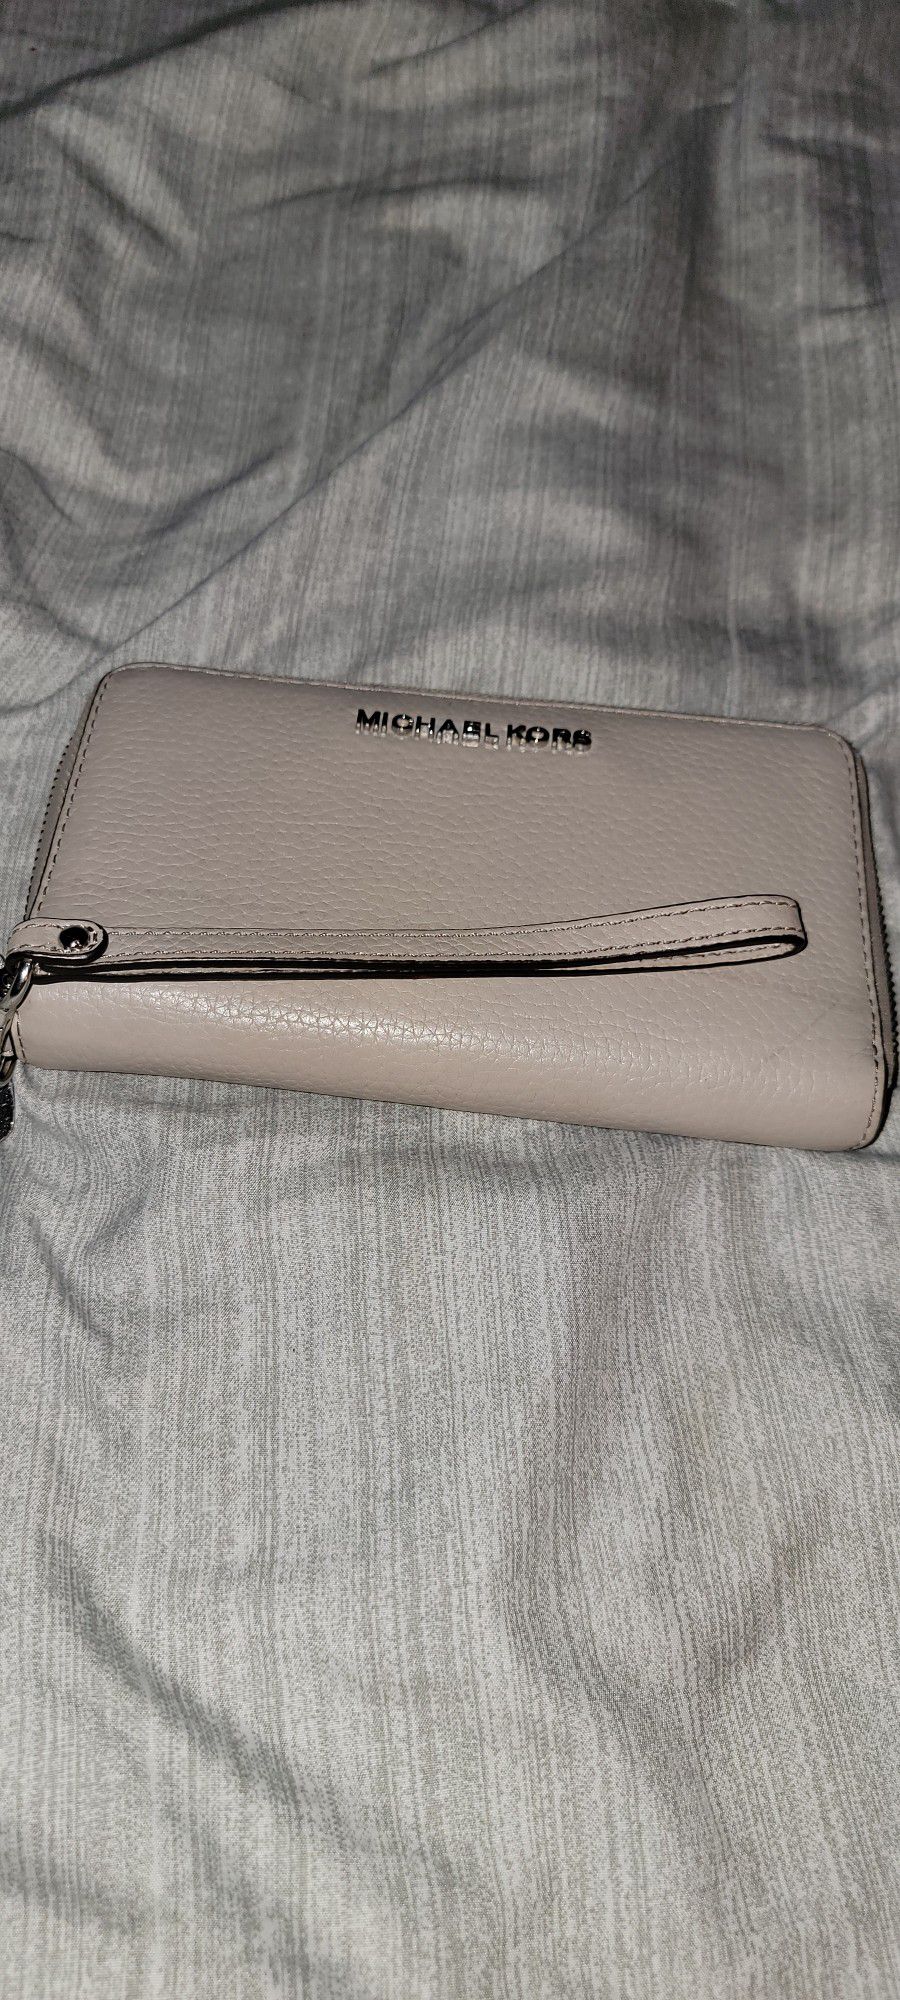 Michael Kors Wallet Small Good Condition 